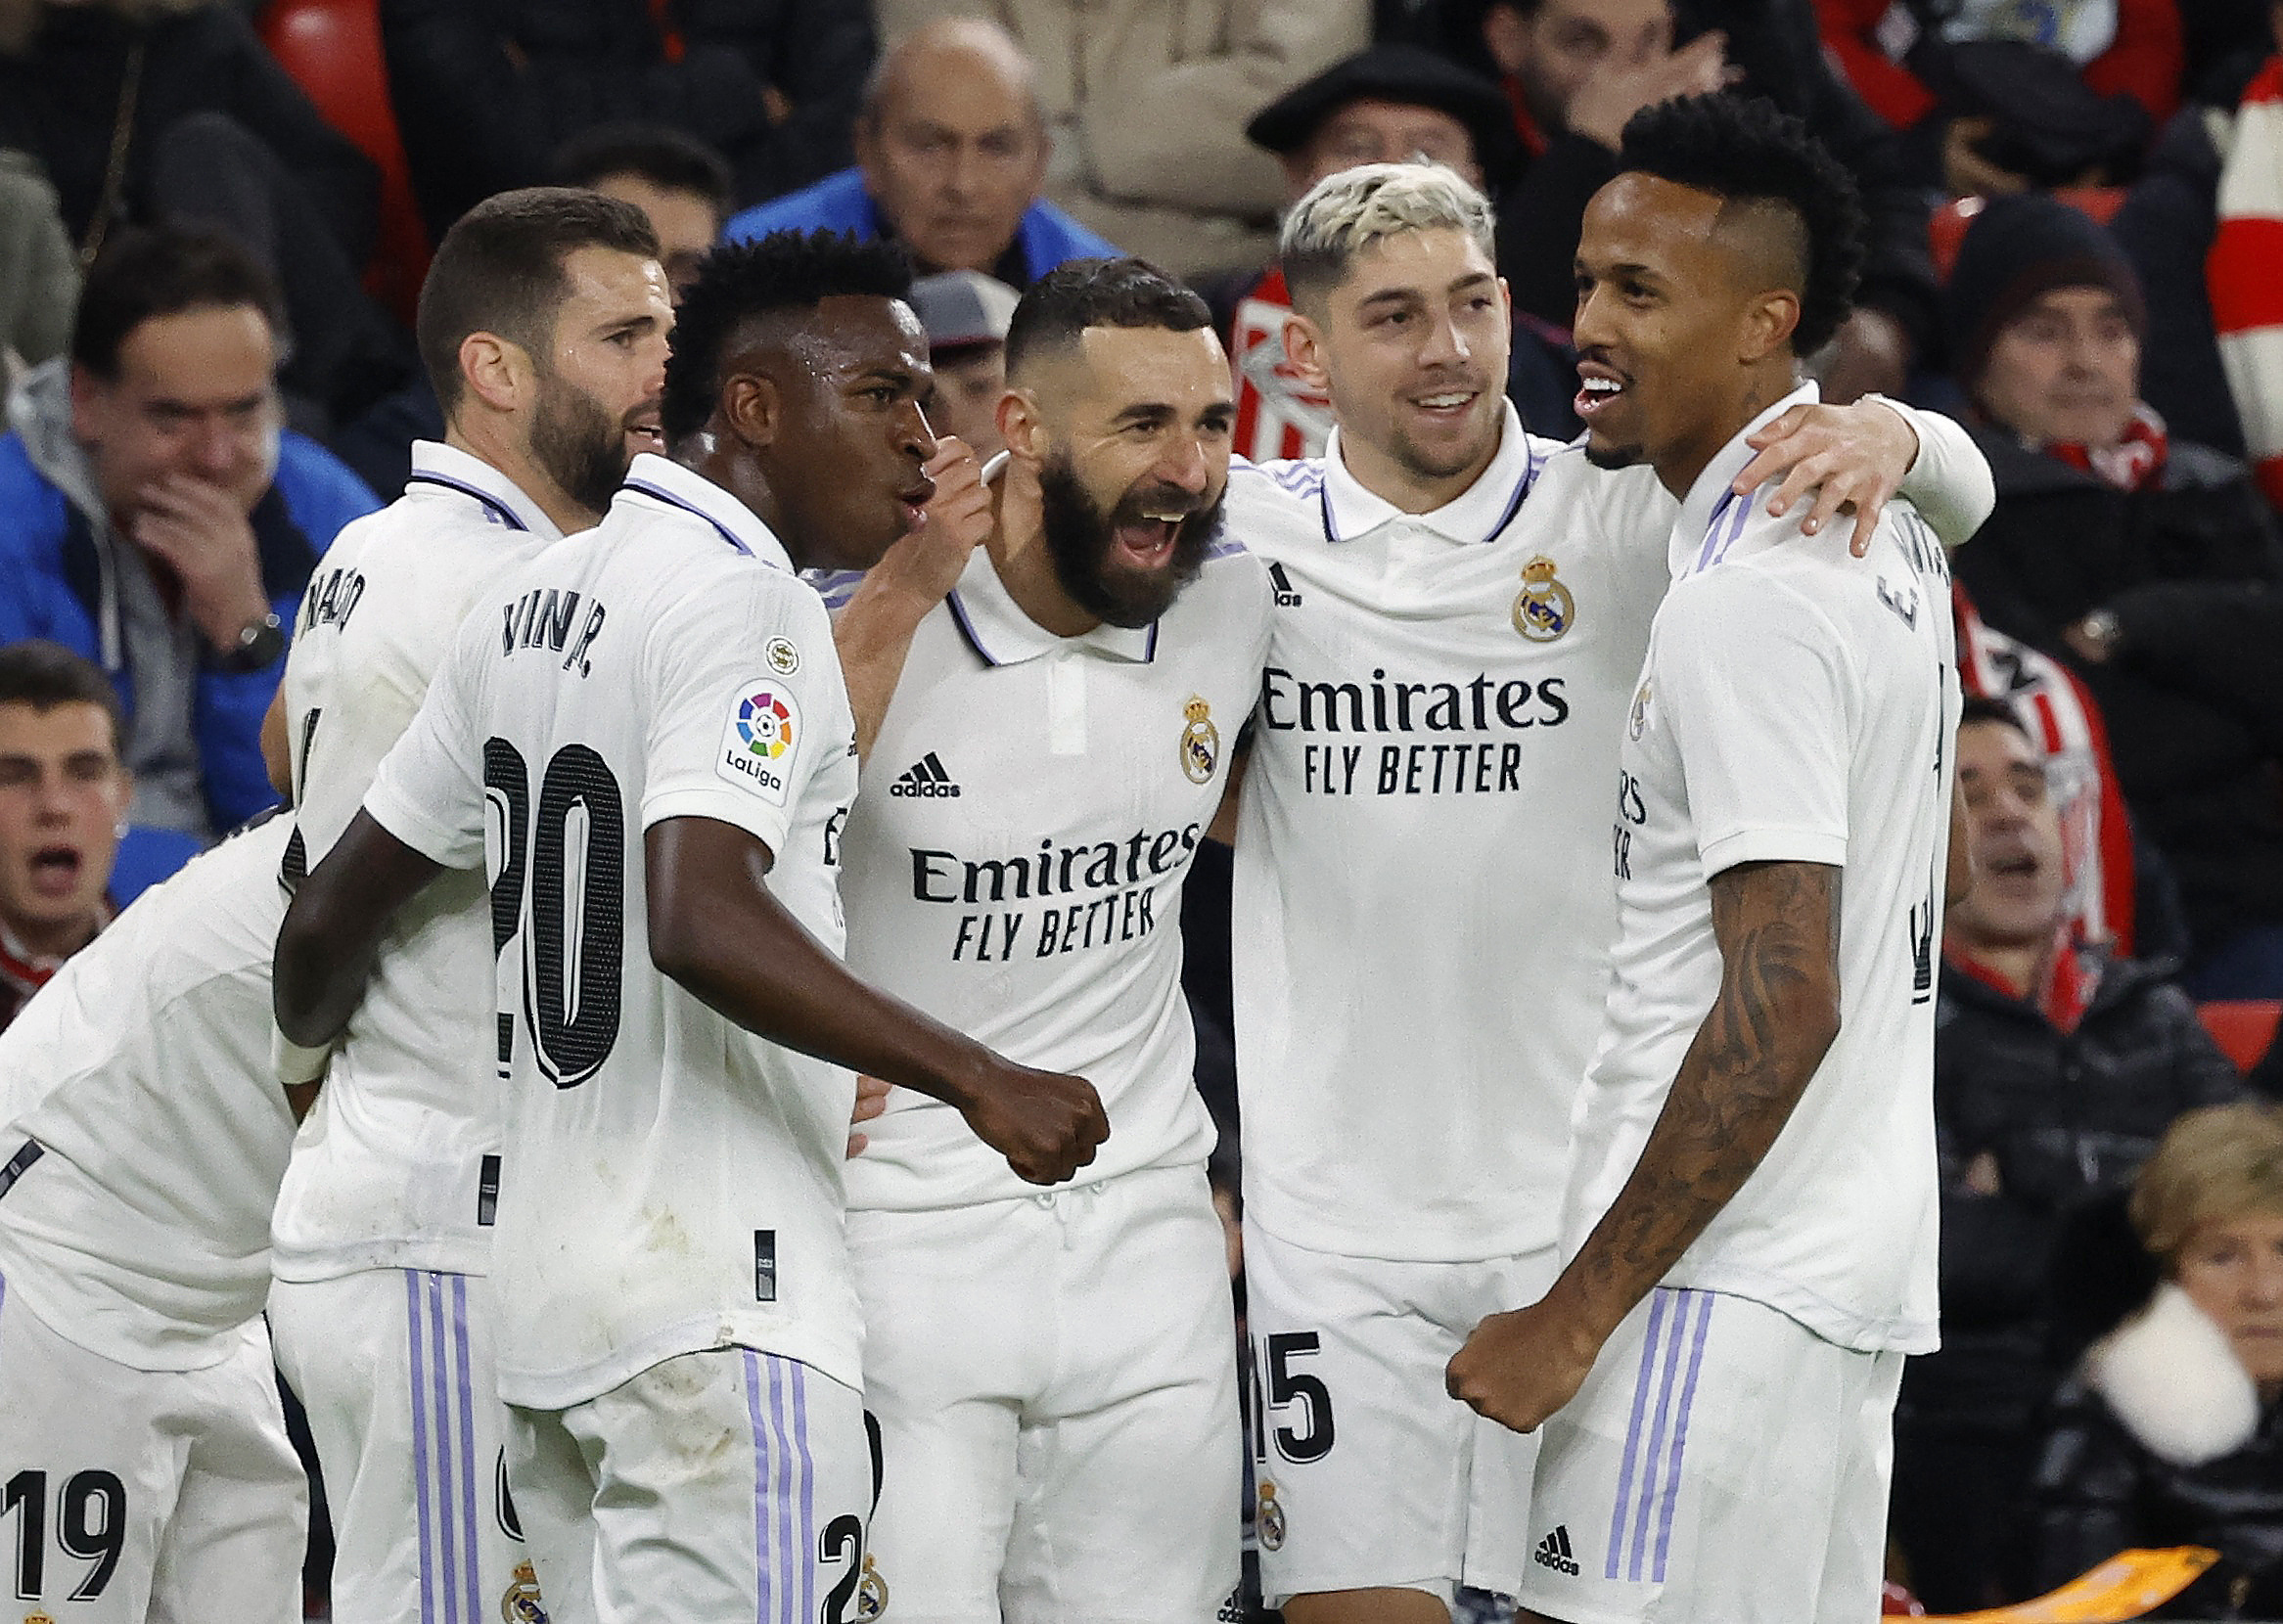 Real Madrid a team in transition, says Ancelotti ahead of Cup